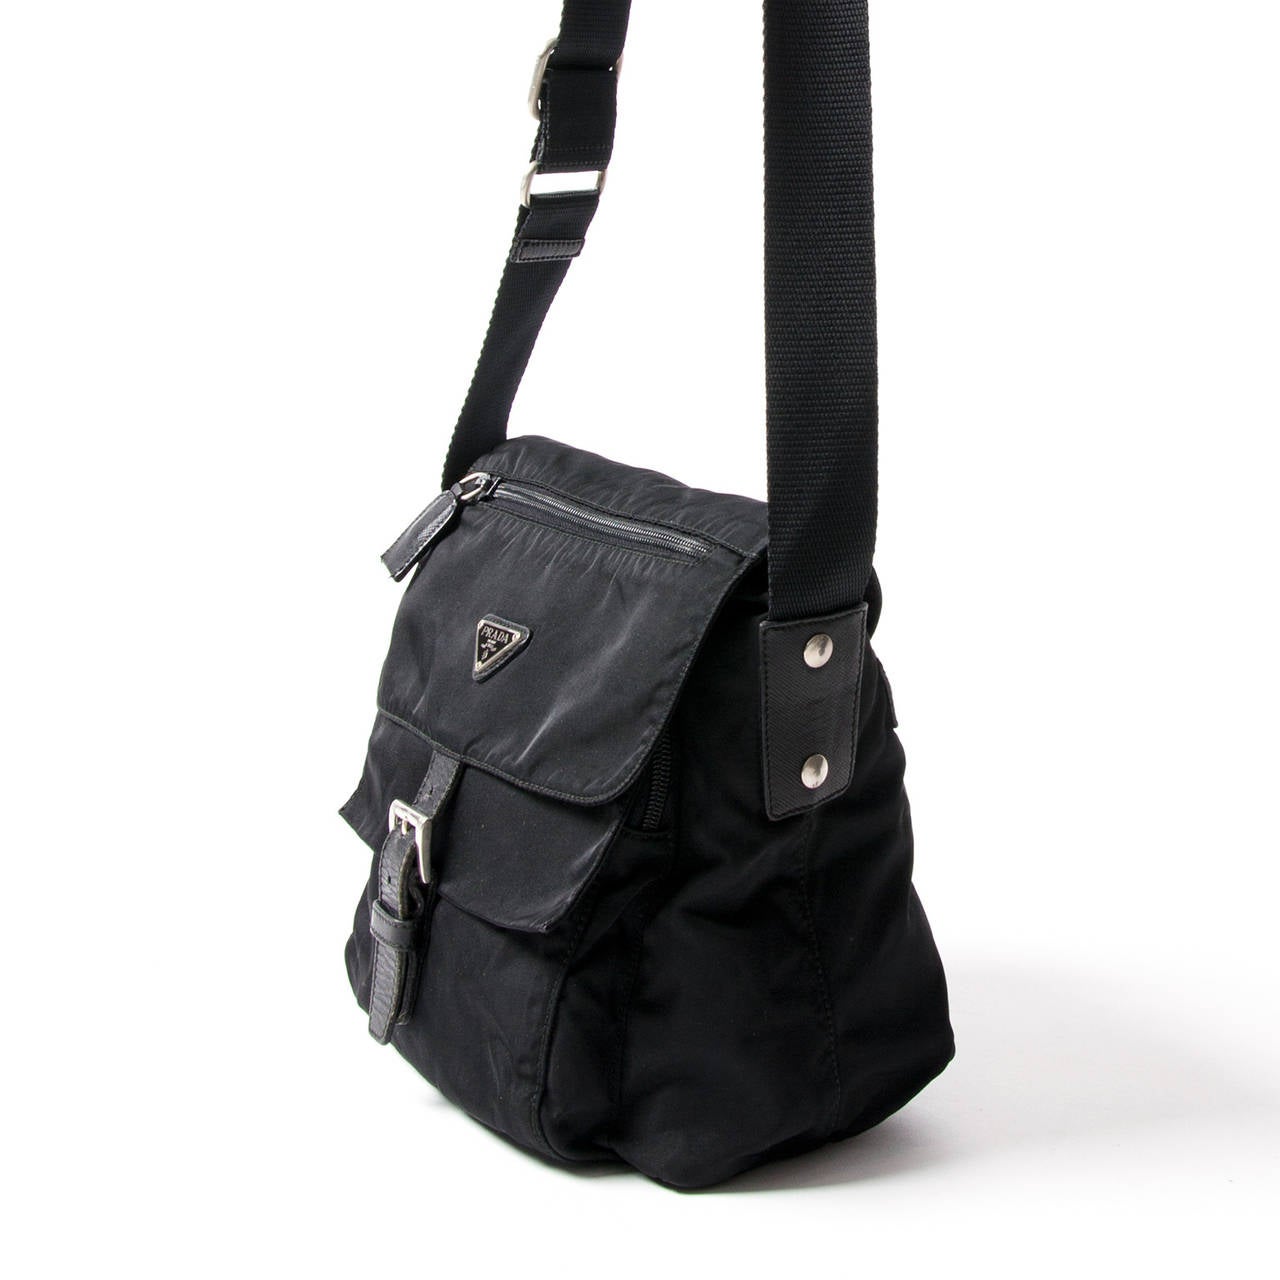 Prada Tessuto messenger bag in black nylon fabric. This handy bag features 3 seperate zipper compartiments and one central compartiment. The bag closes with a silver hardware buckle on the front.
Long strap to be worn across body.